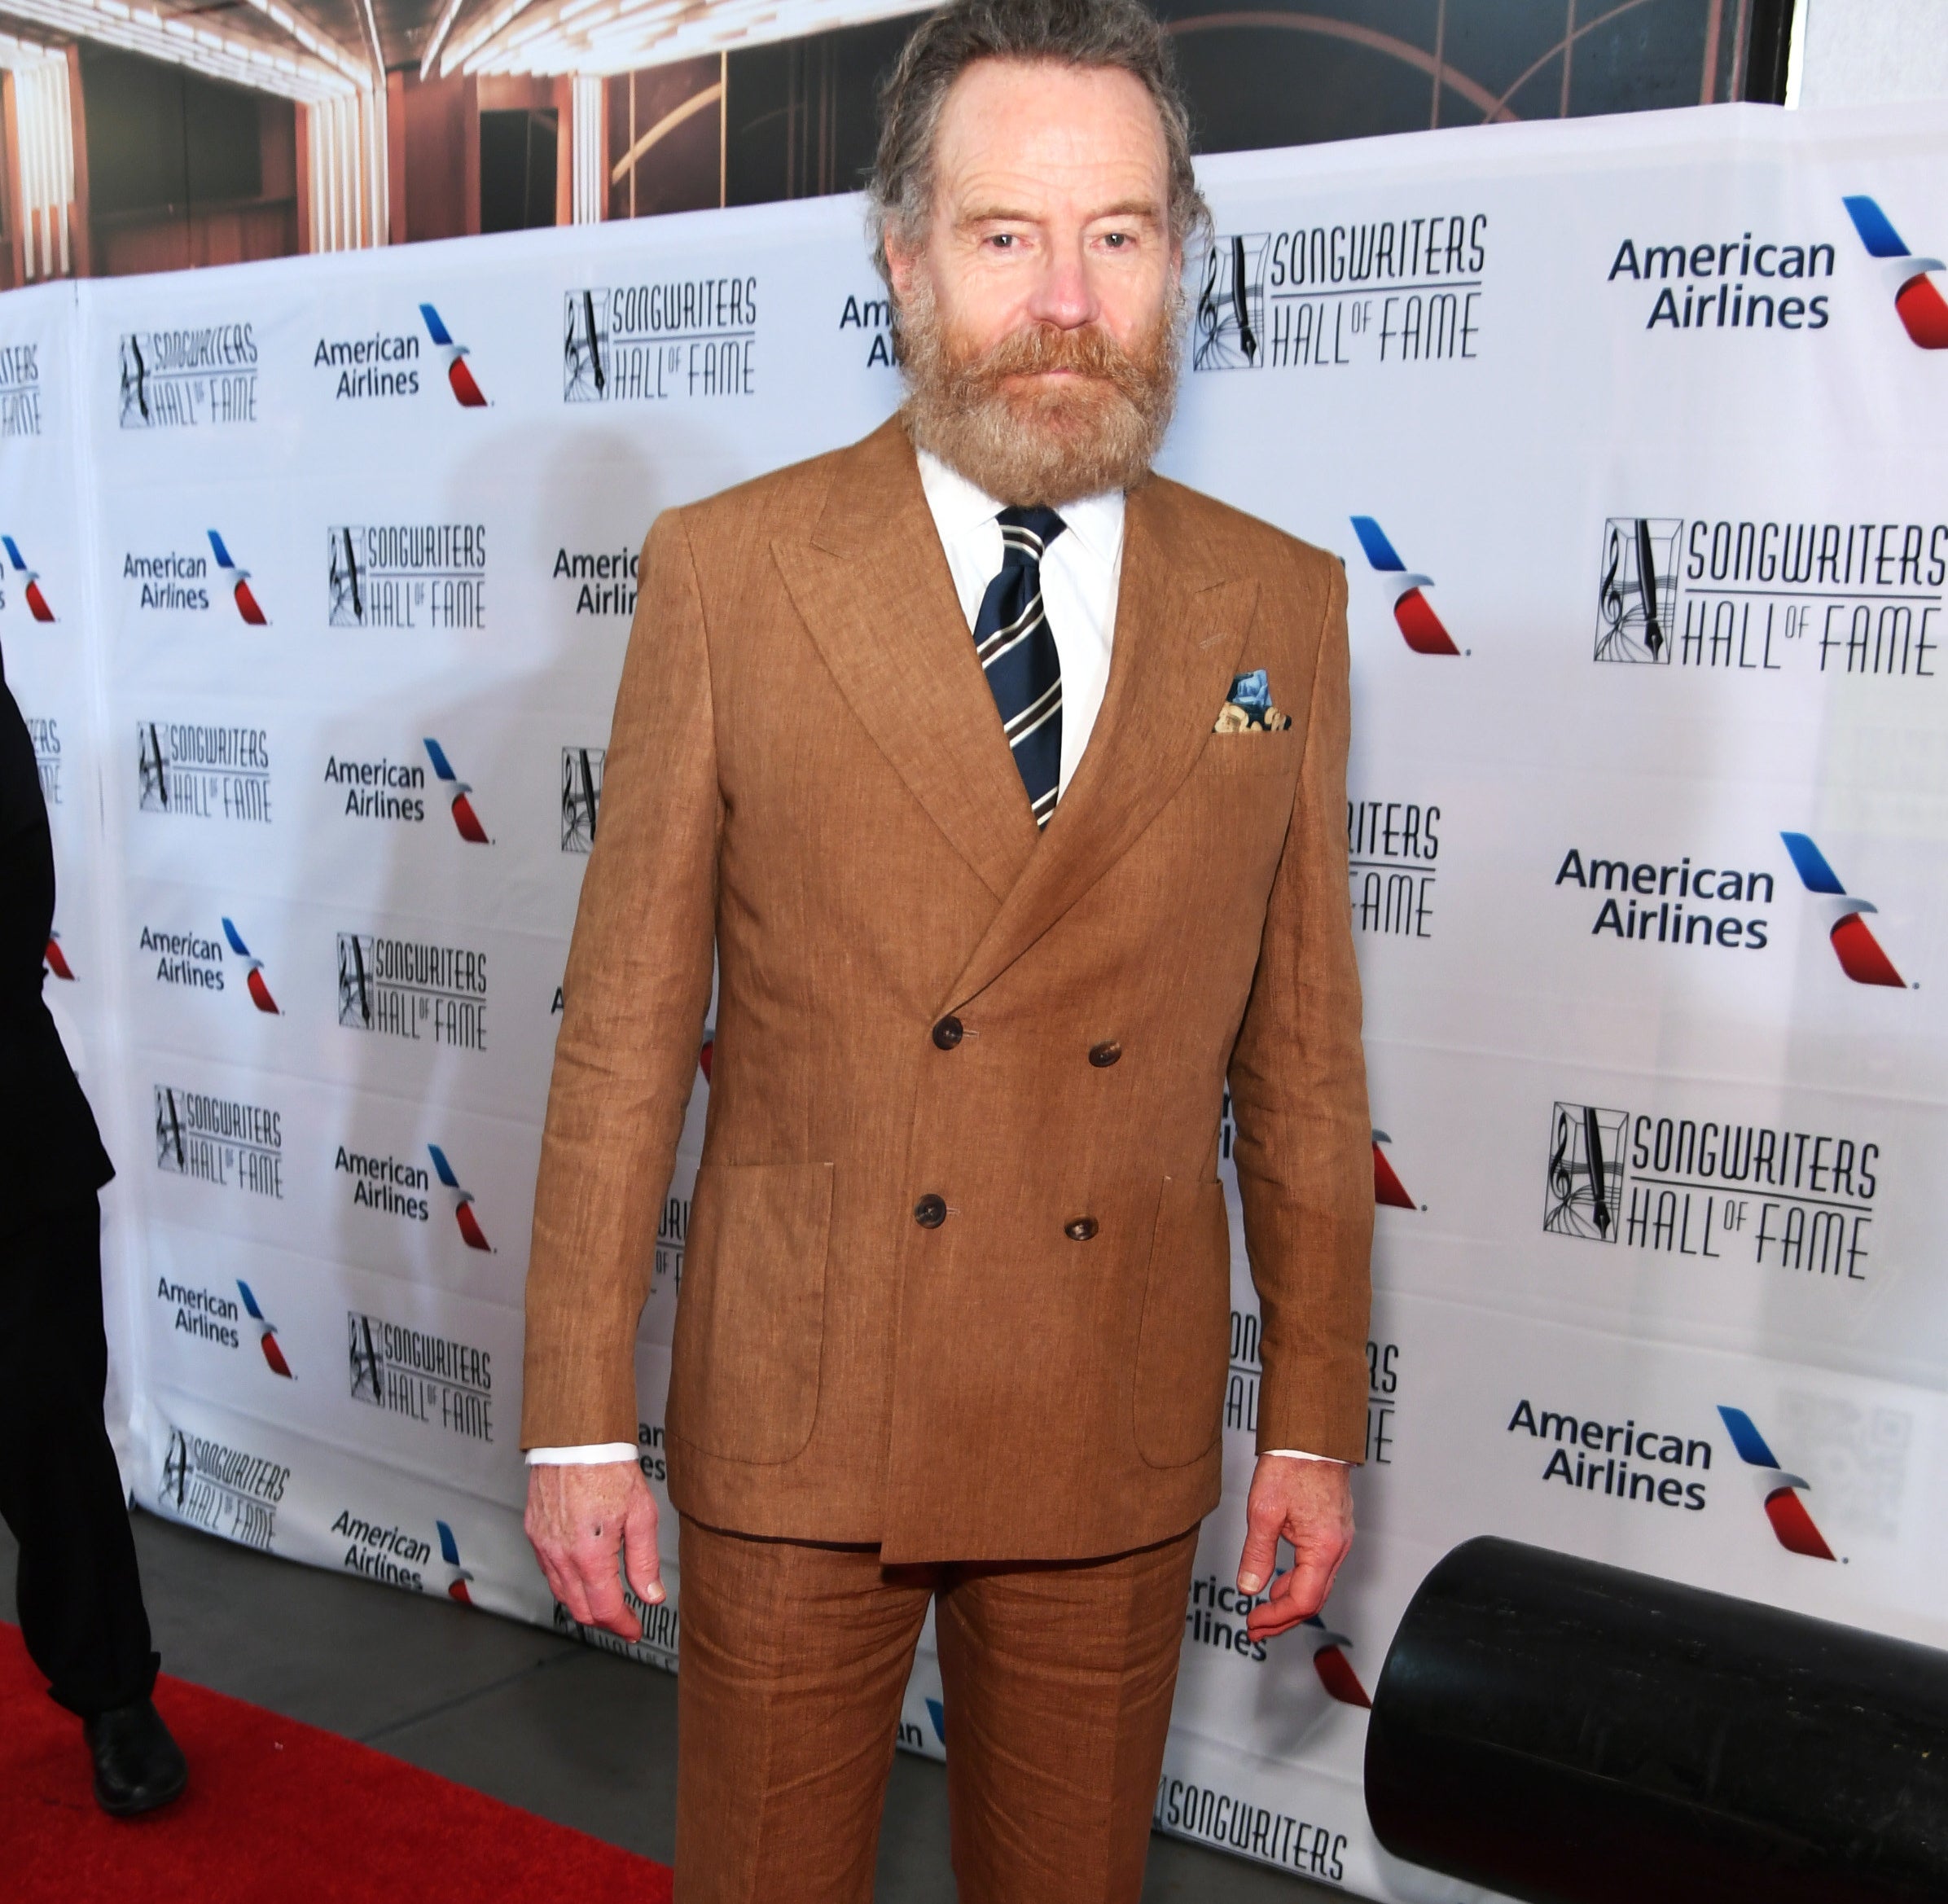 Bryan in a suit and tie and with a beard on the red carpet